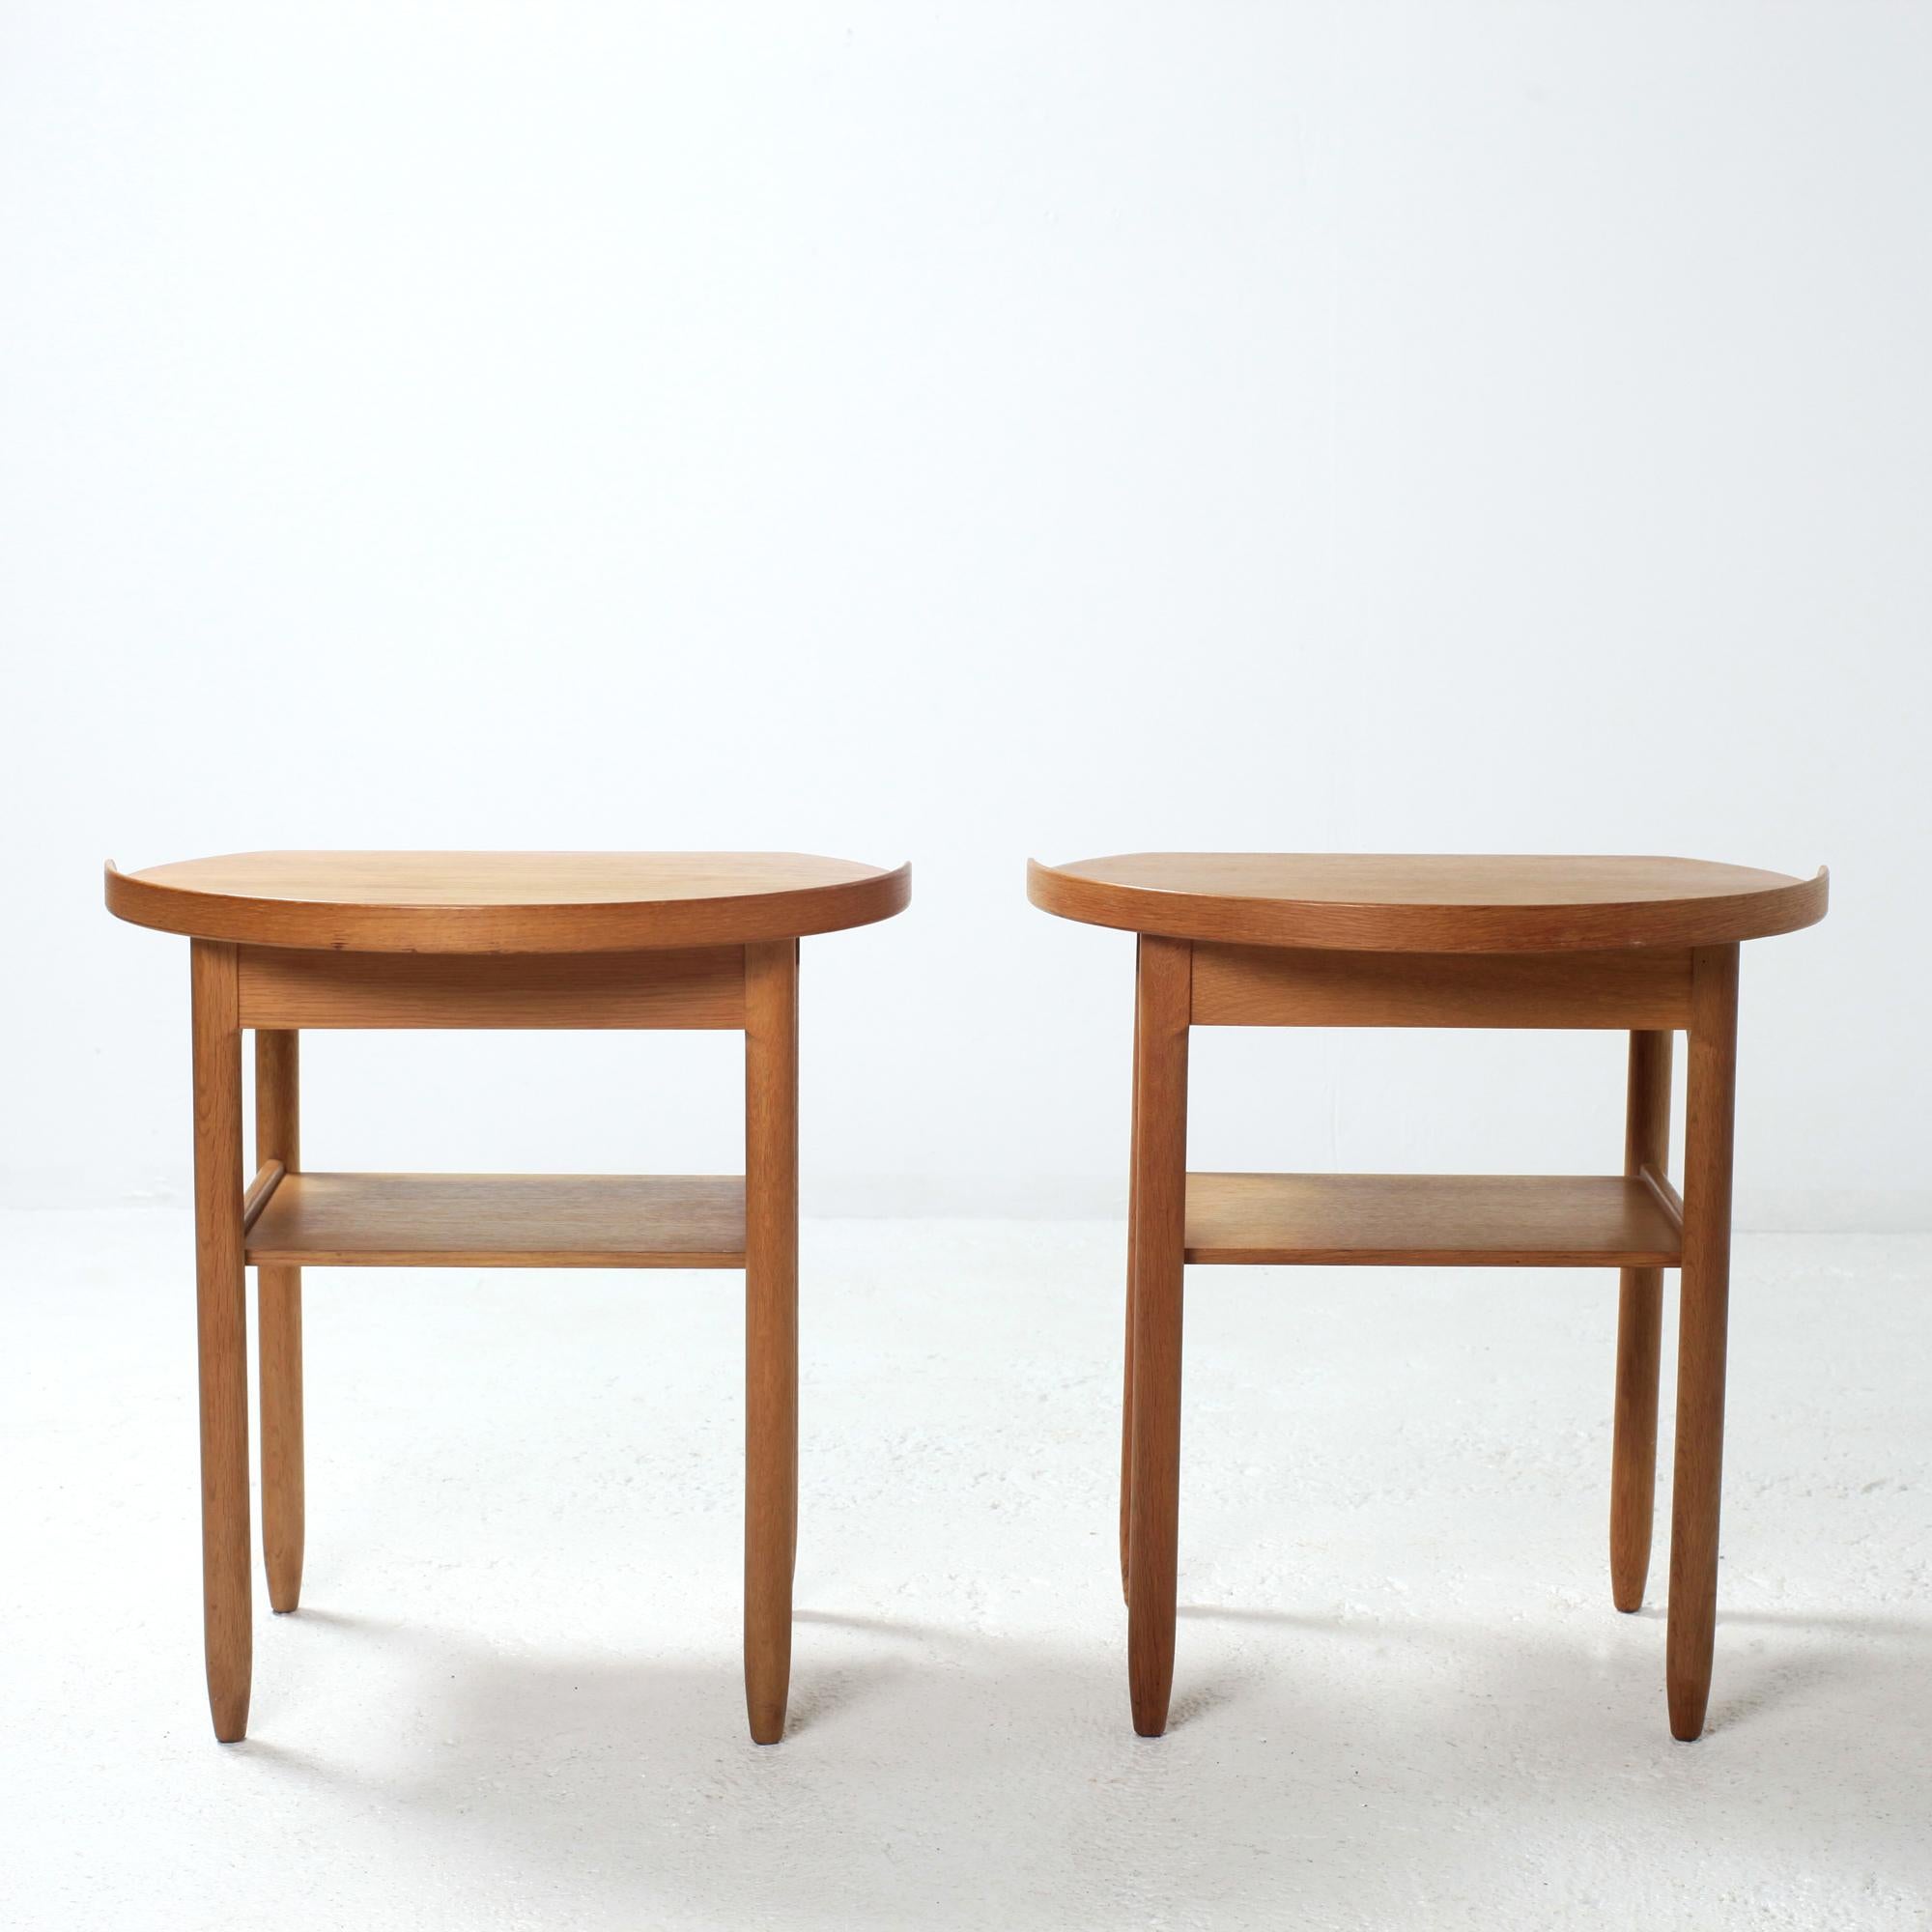 Mid-20th Century Pair of Bedside Tables by Sven Engström and Gunnar Myrstrand for Bodafors 1960's